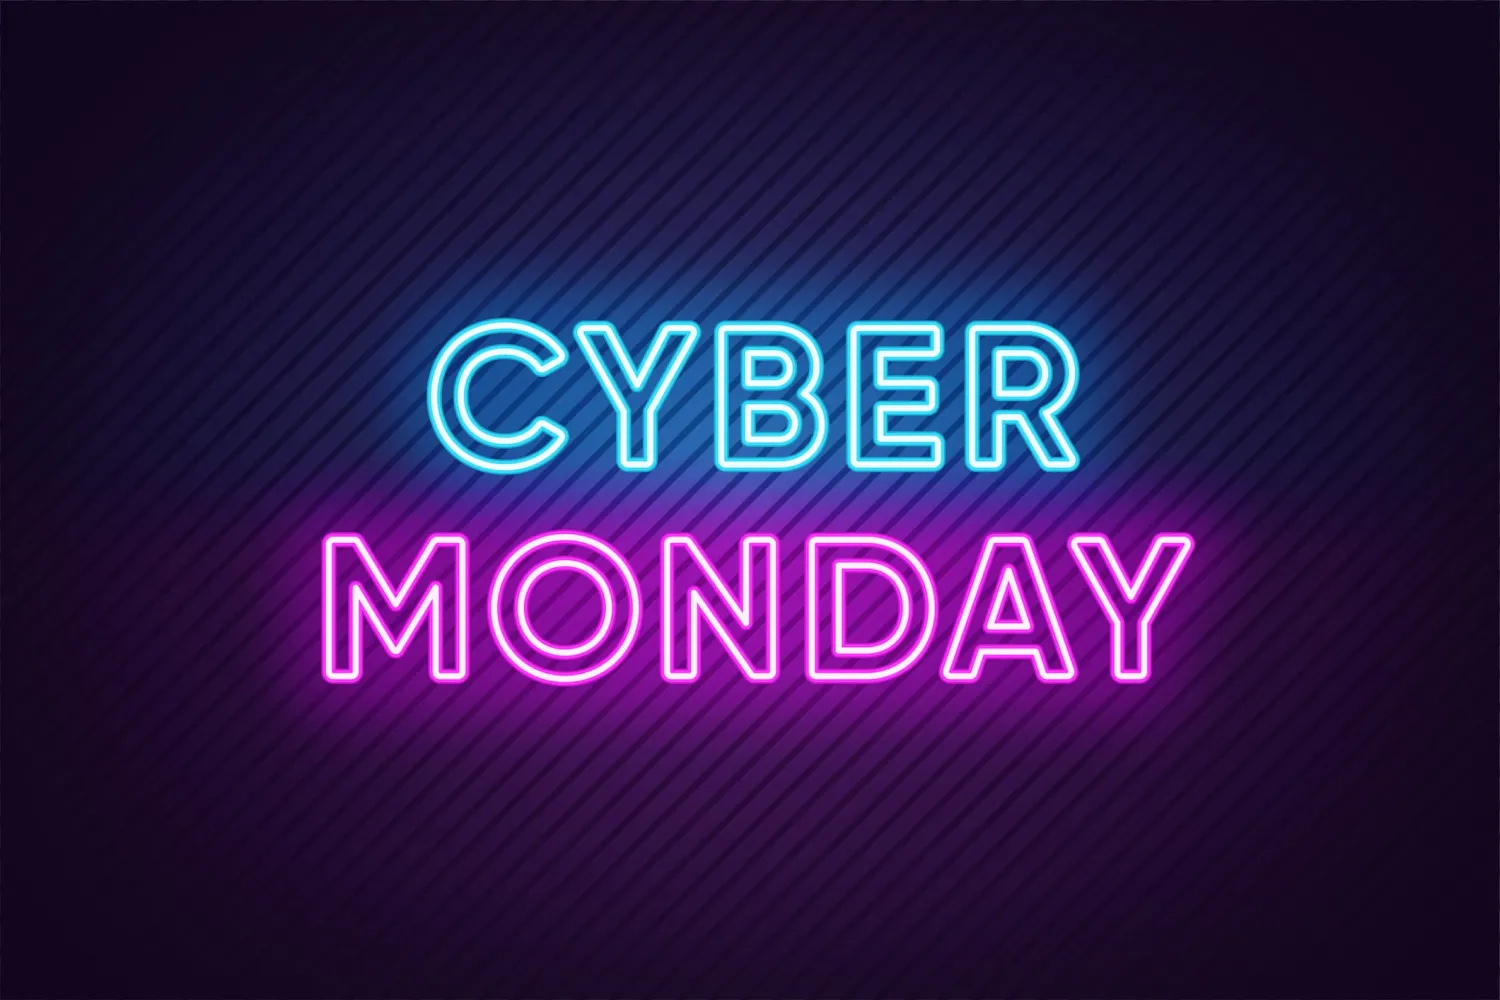 Cyber Monday Offer image